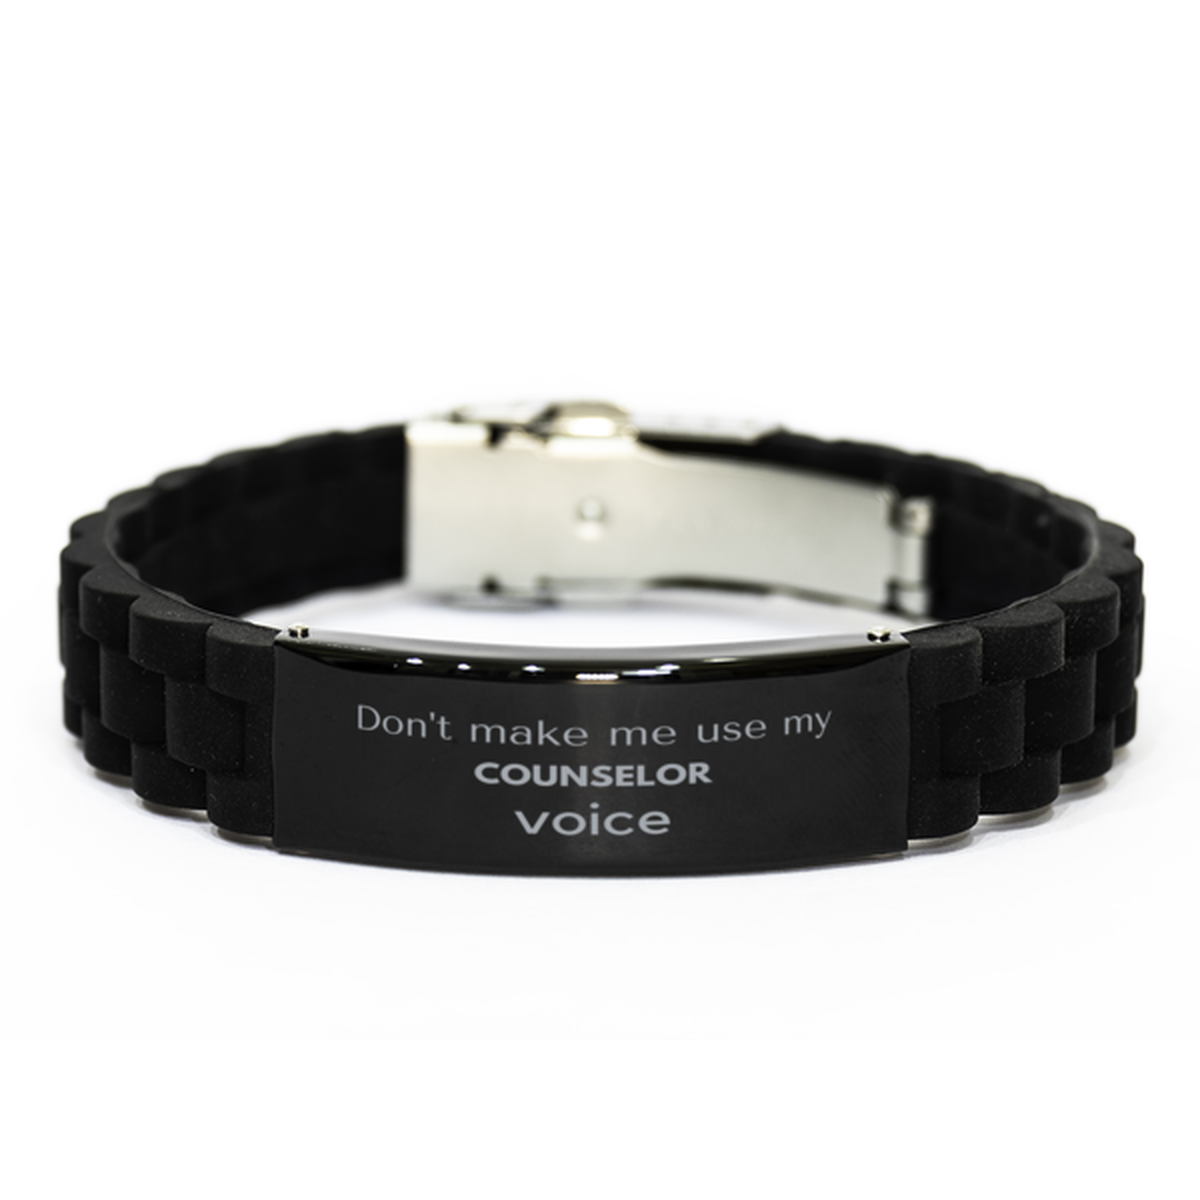 Don't make me use my Counselor voice, Sarcasm Counselor Gifts, Christmas Counselor Black Glidelock Clasp Bracelet Birthday Unique Gifts For Counselor Coworkers, Men, Women, Colleague, Friends